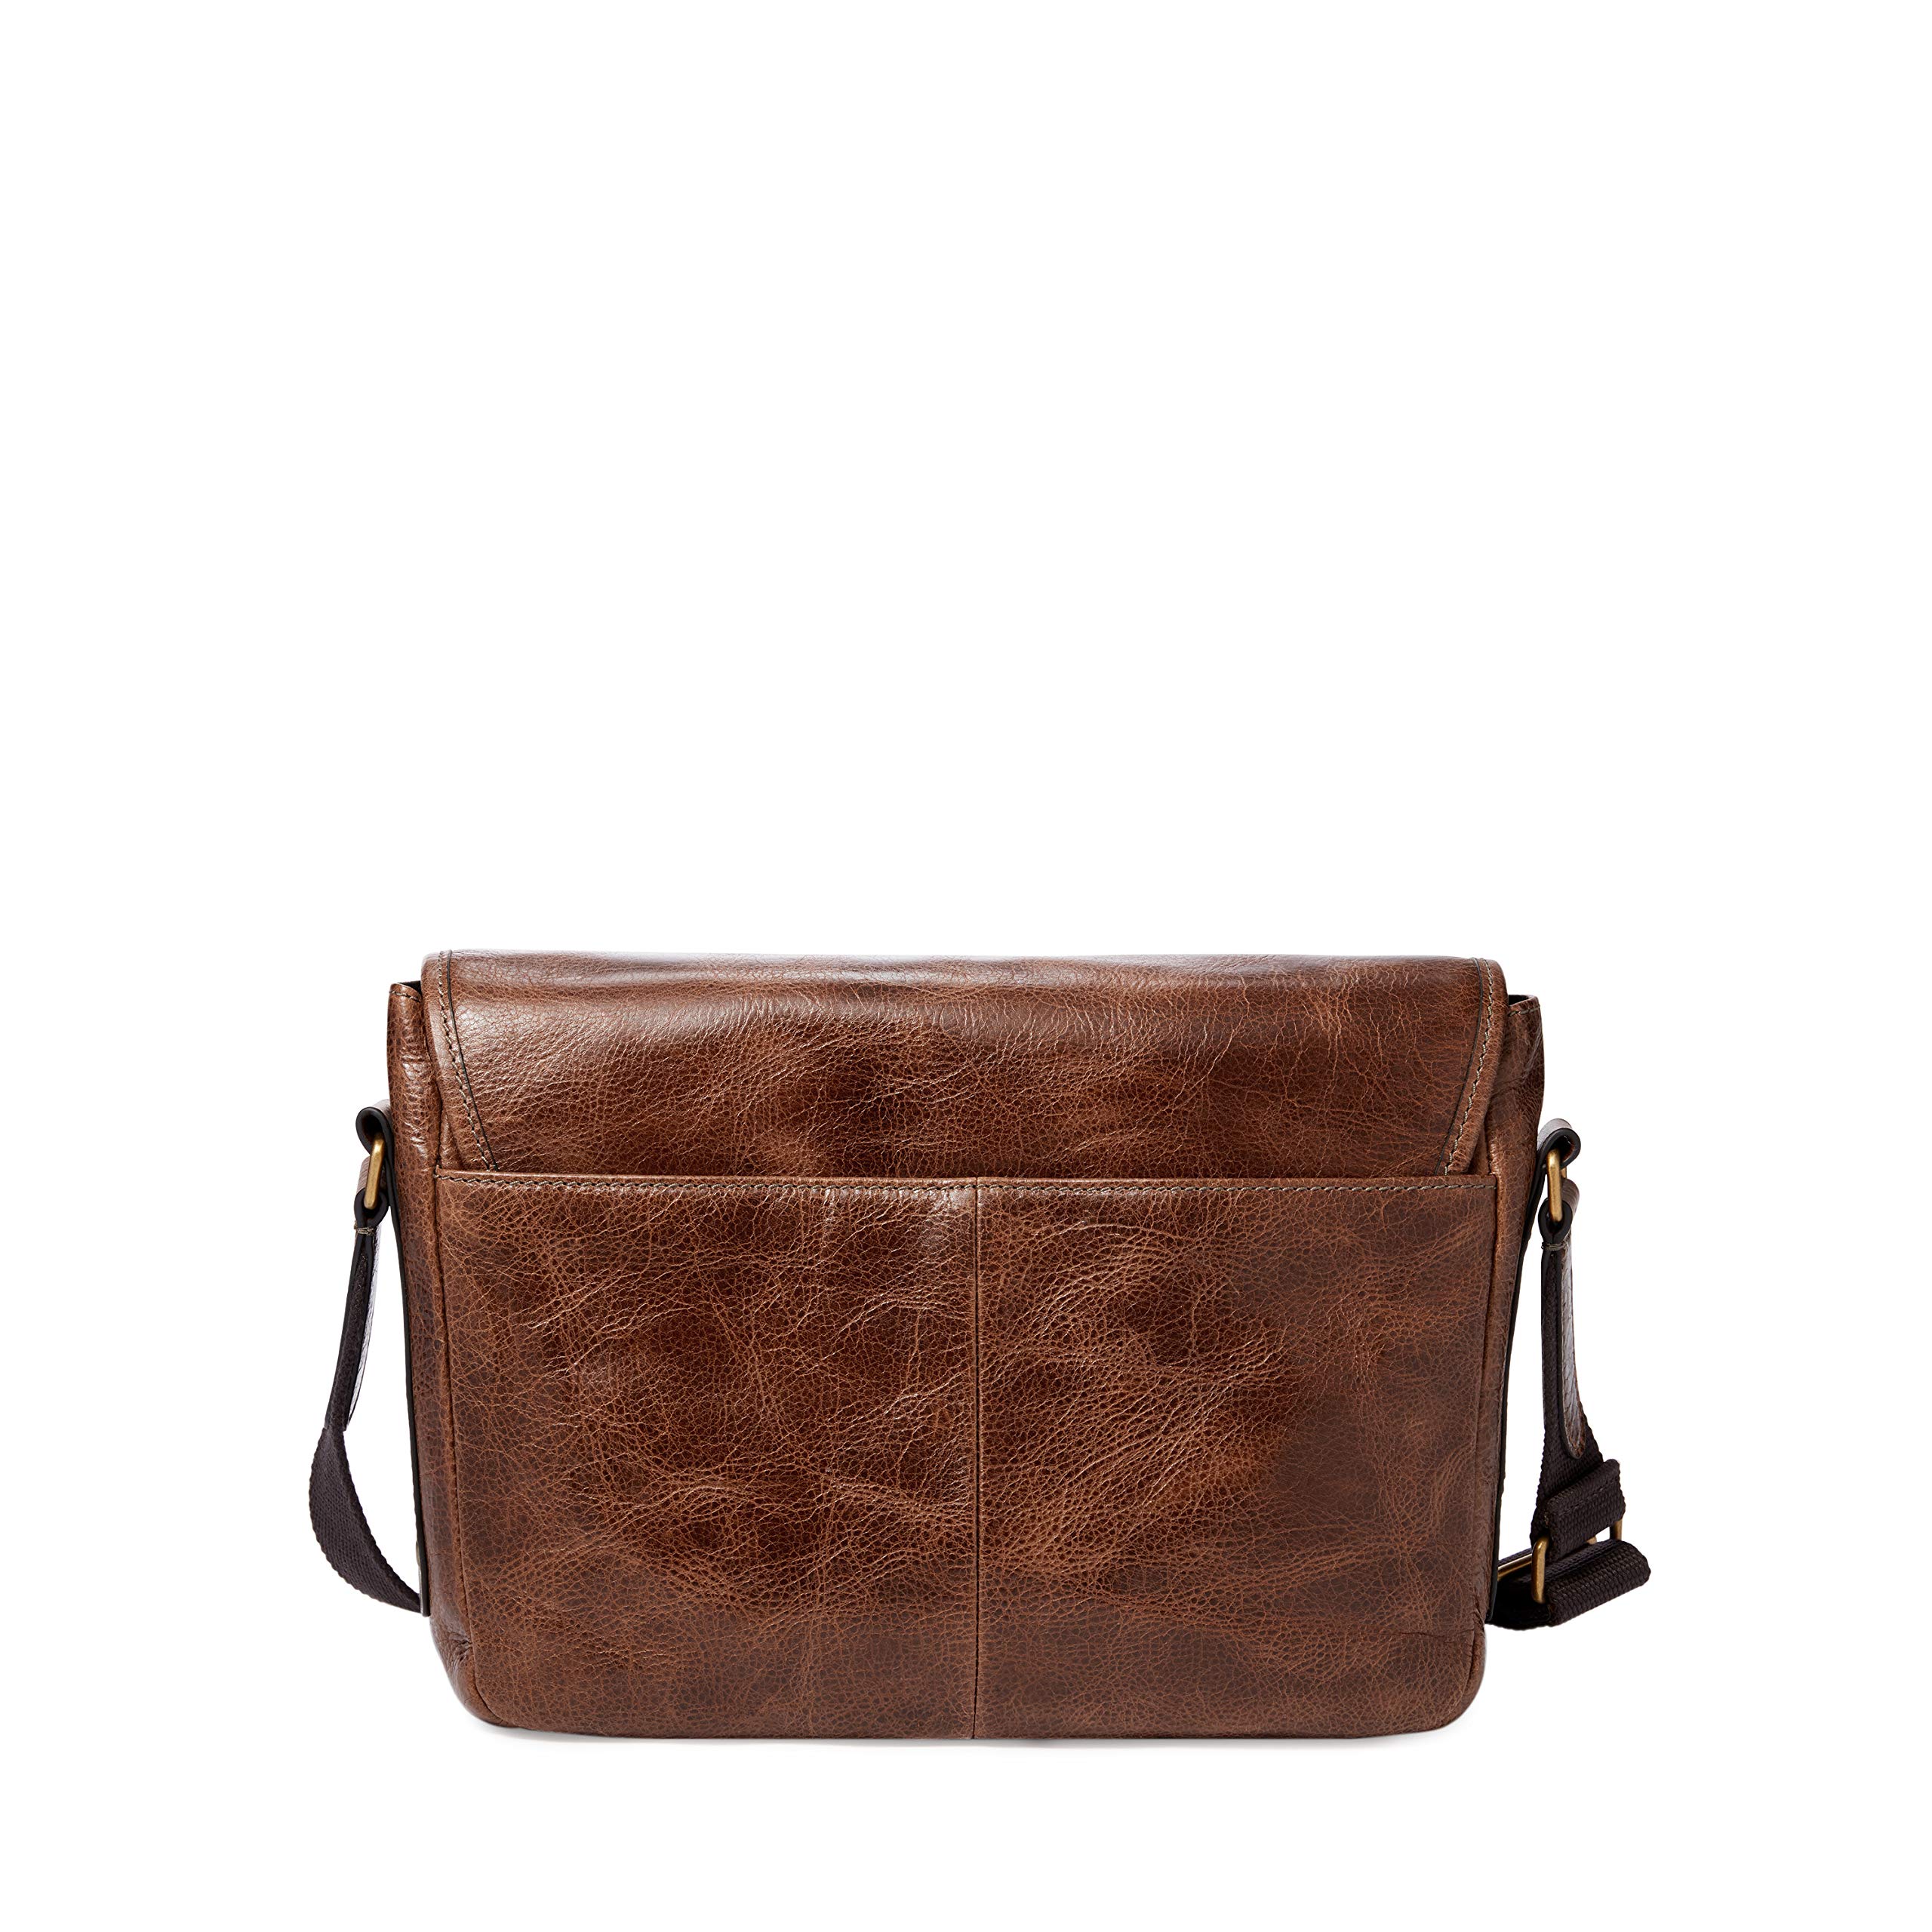 Fossil Men's Leather or Fabric Courier Messenger Bag for Men